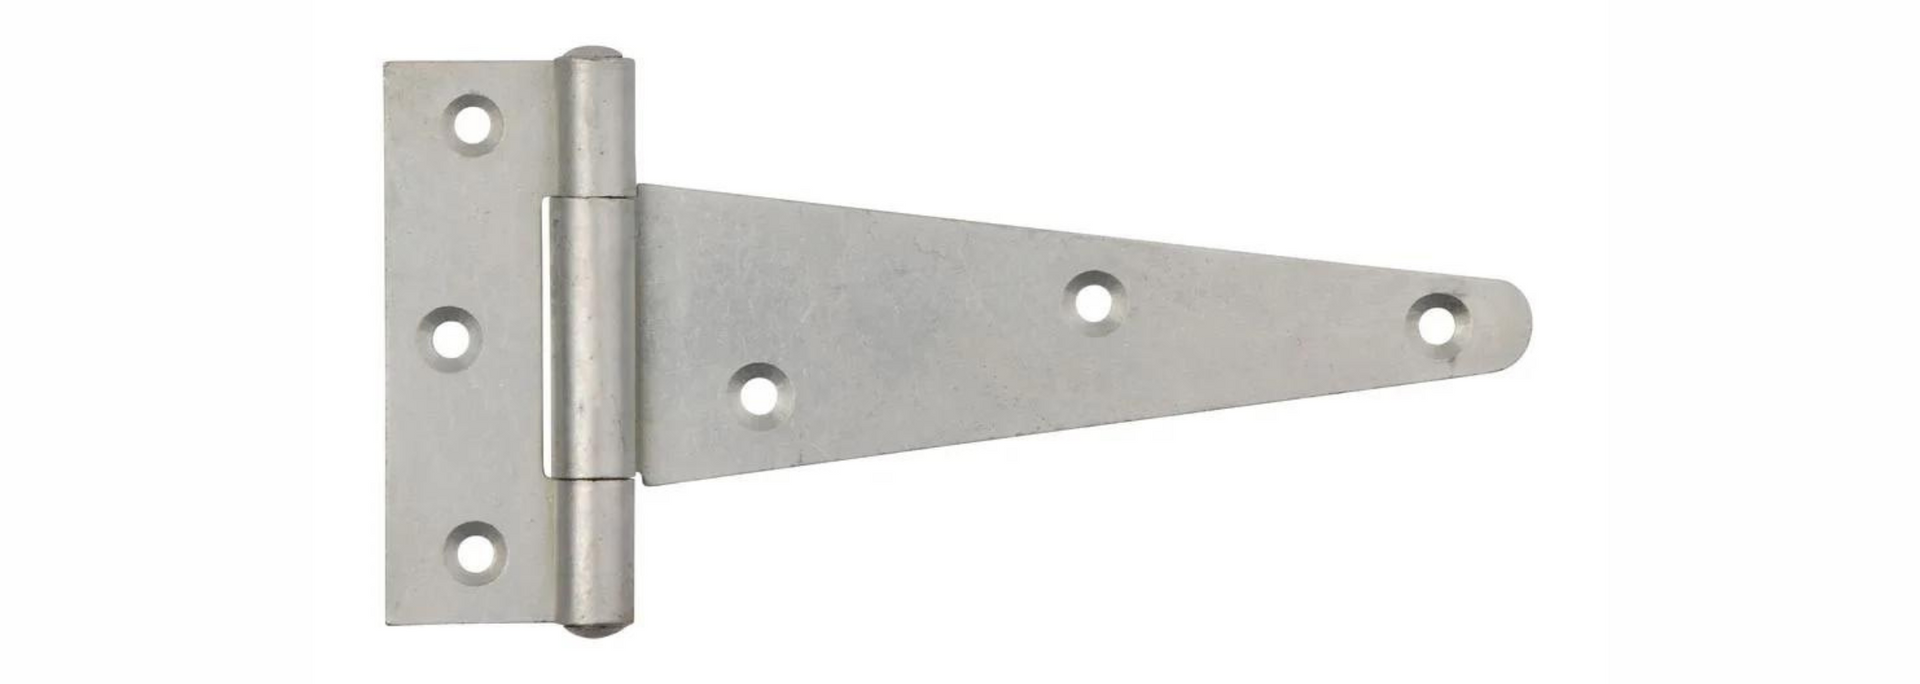 Picture of a T hinge.